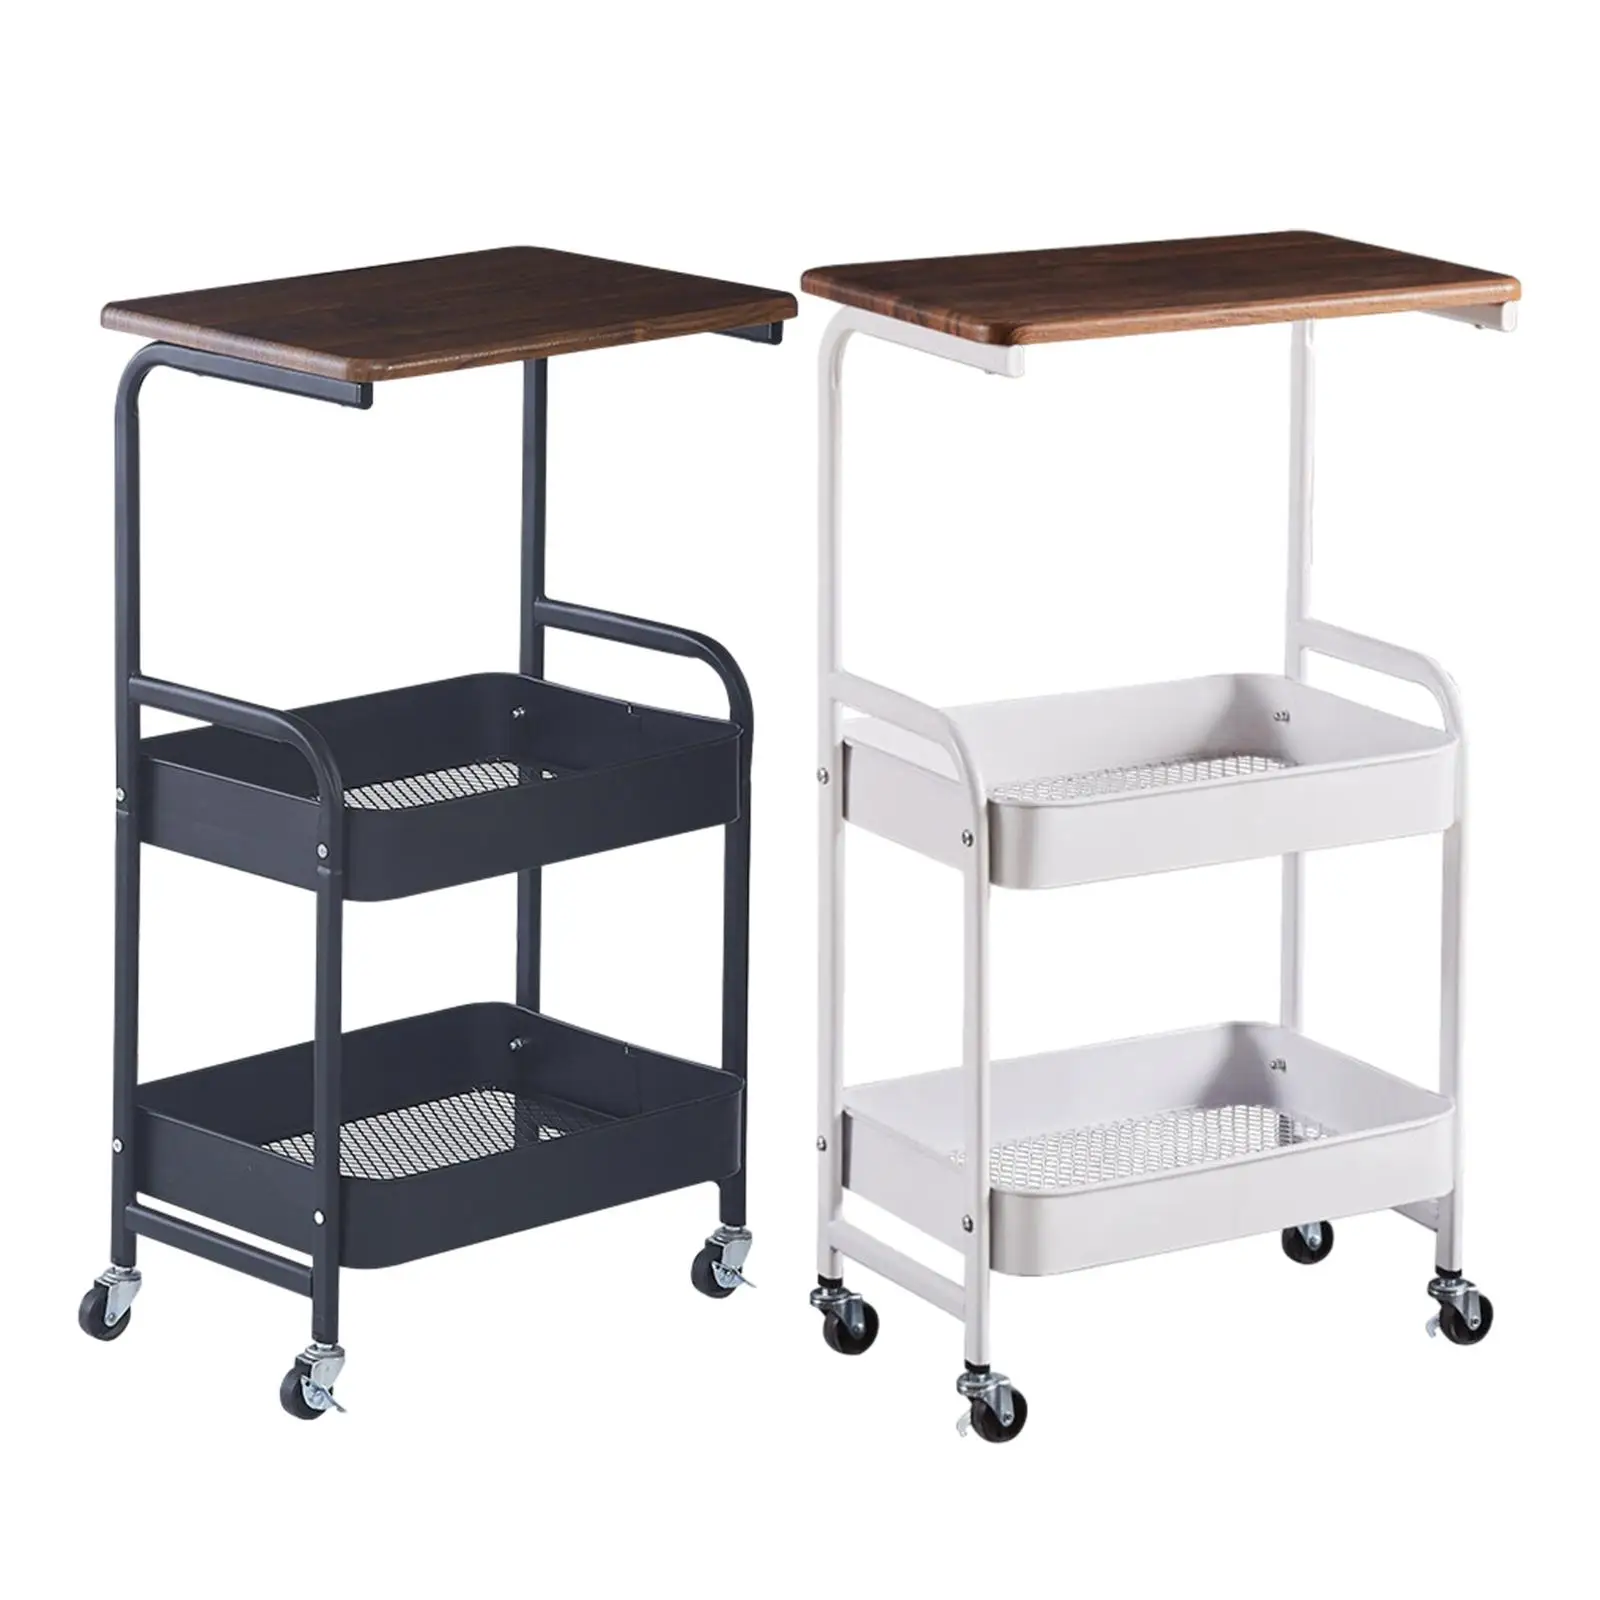 3 Tier Slim Storage Cart Fruits Holder Rustproof Slide Out Organizer Cart for Kitchen Office Bathroom Laundry Room Narrow Place